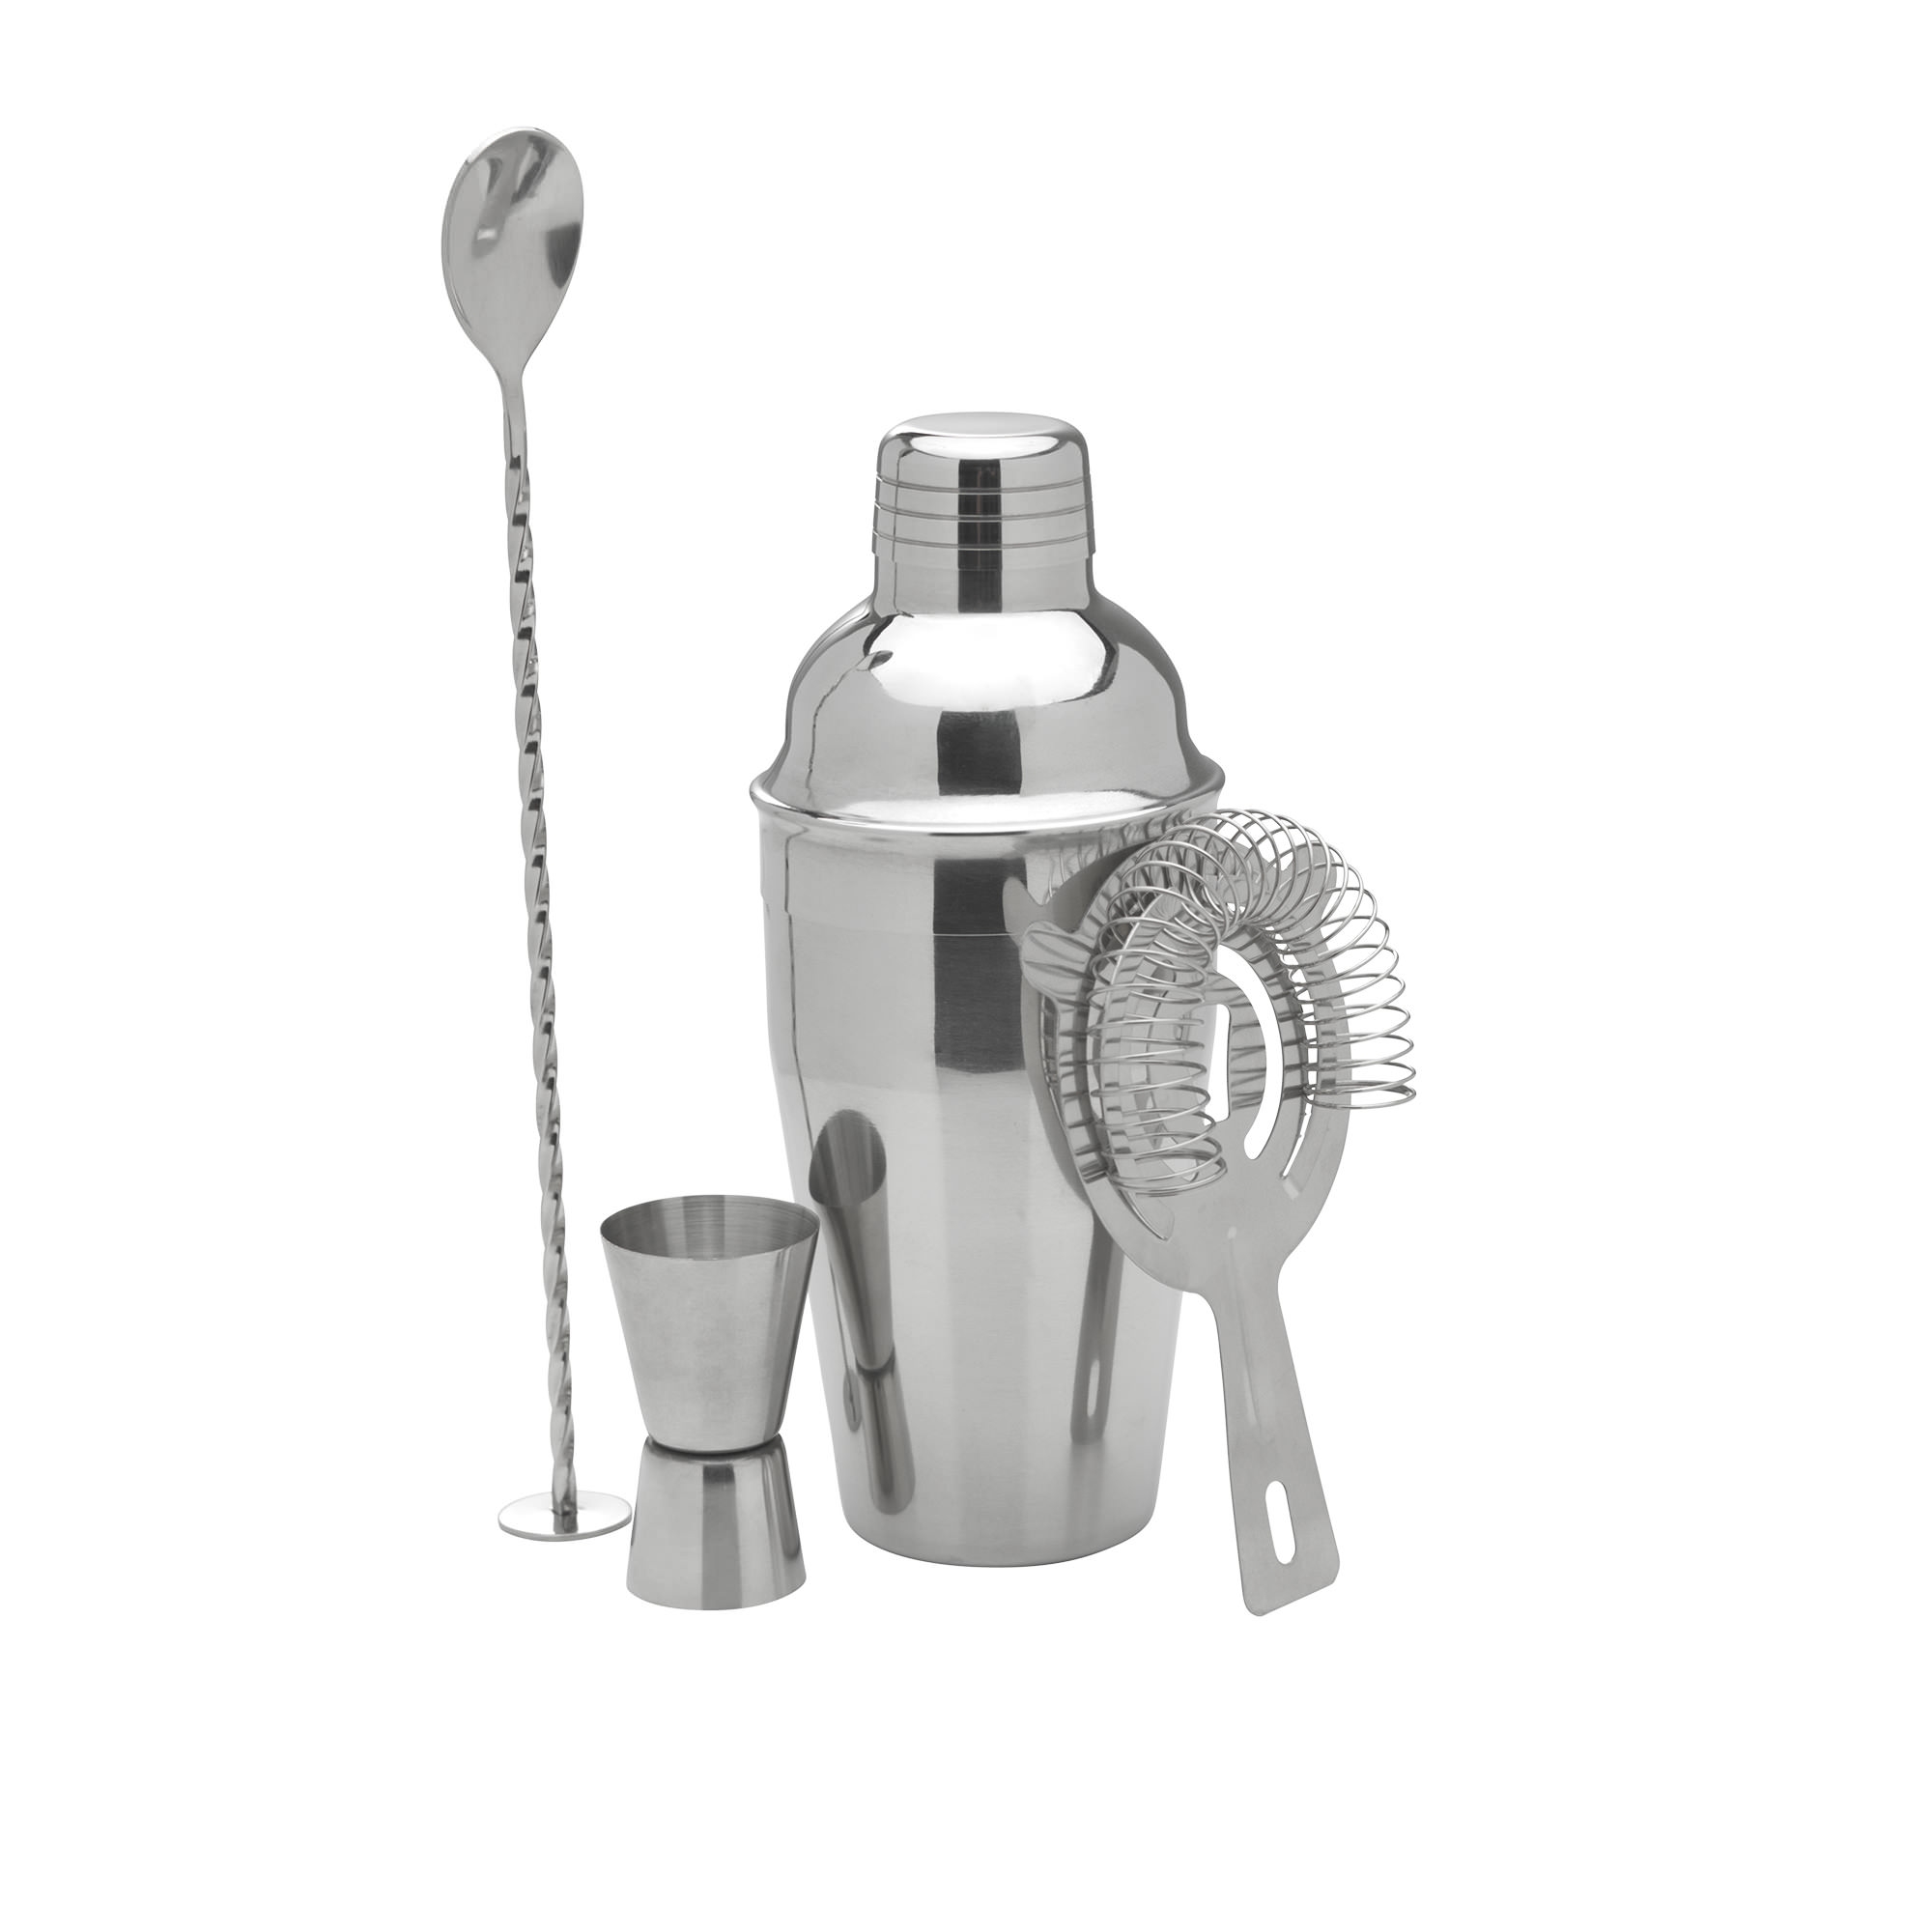 Winex Stainless Steel Cocktail Set 4pc Image 1